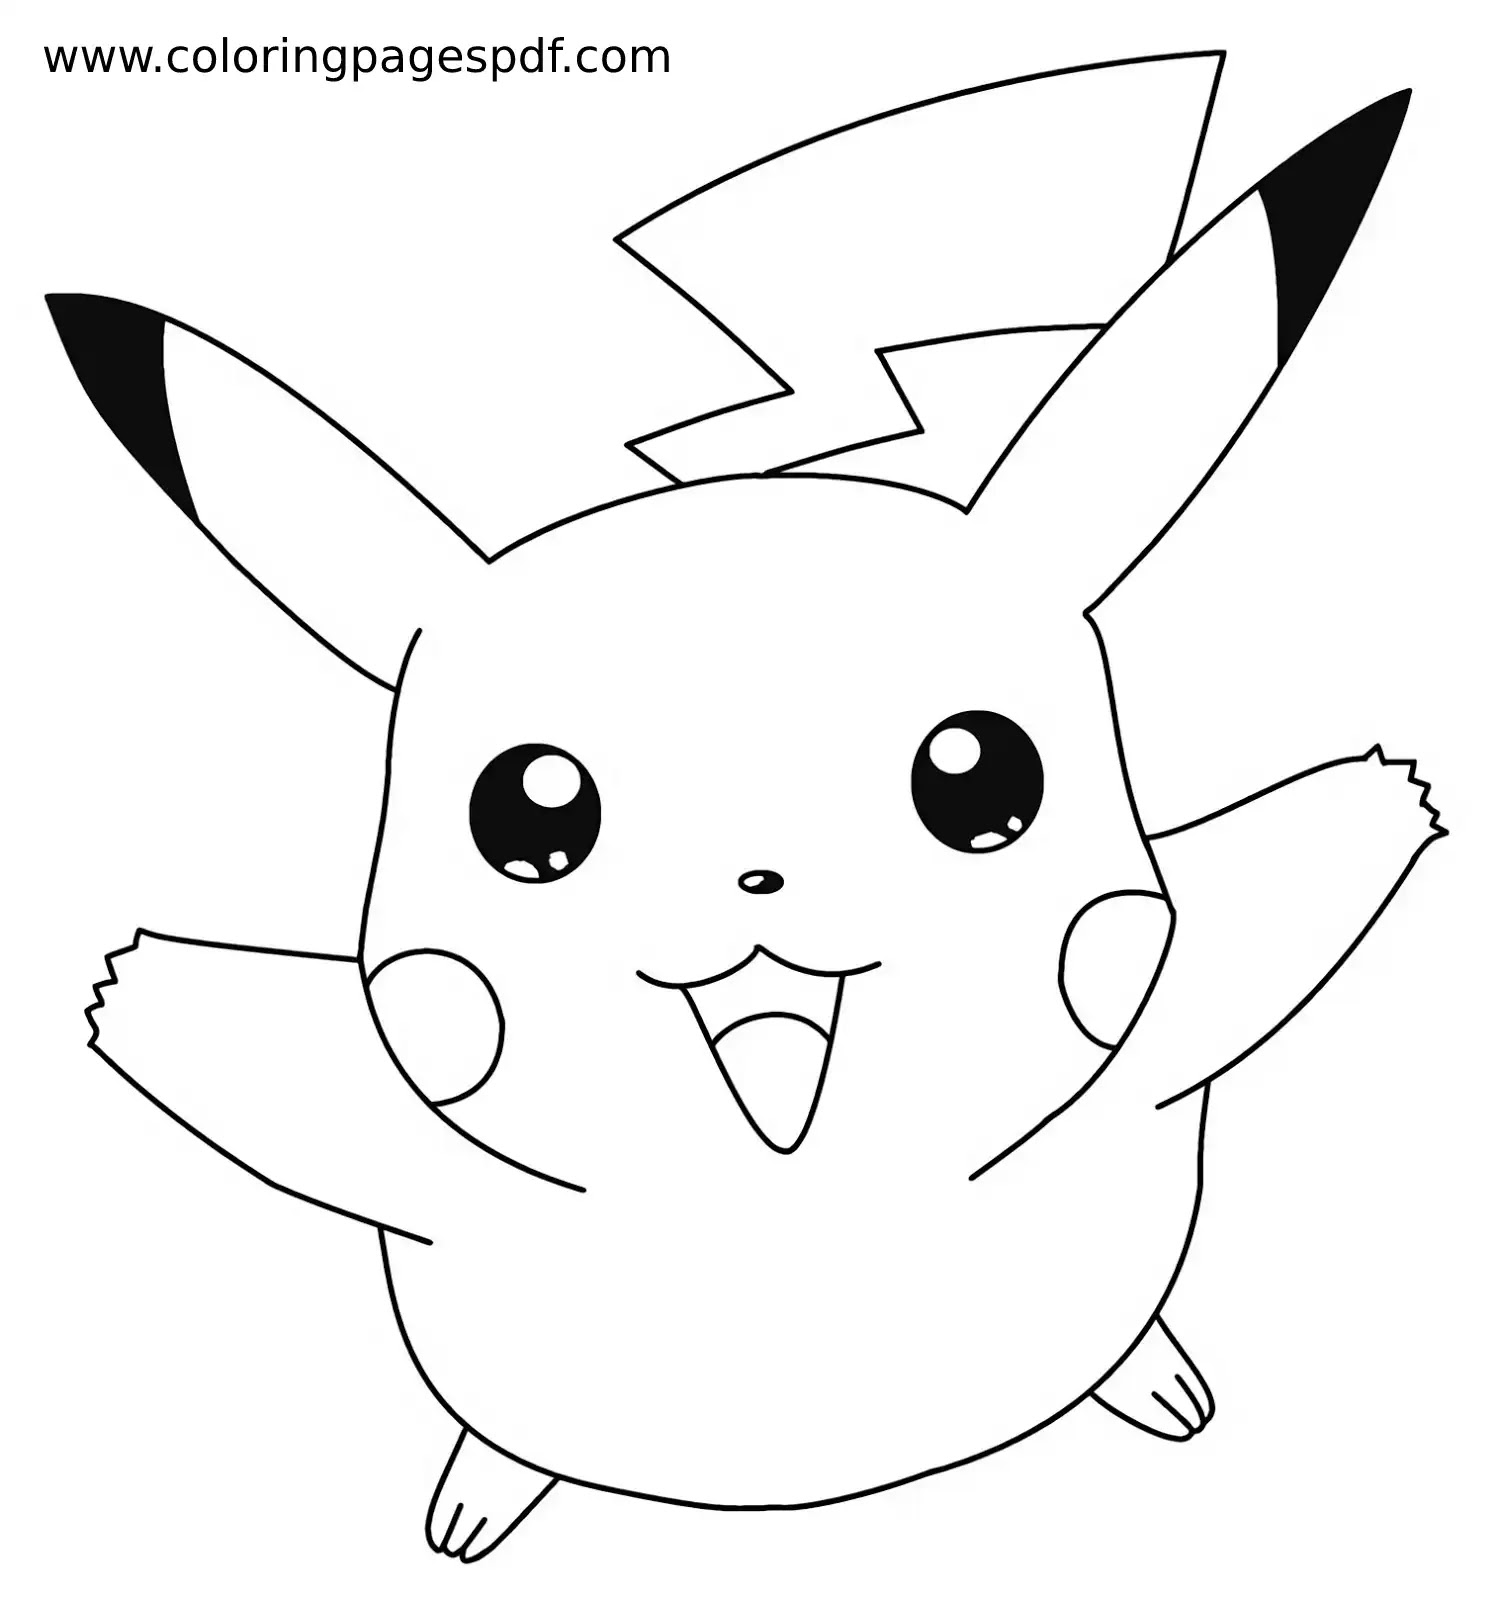 Coloring Page Of Pikachu